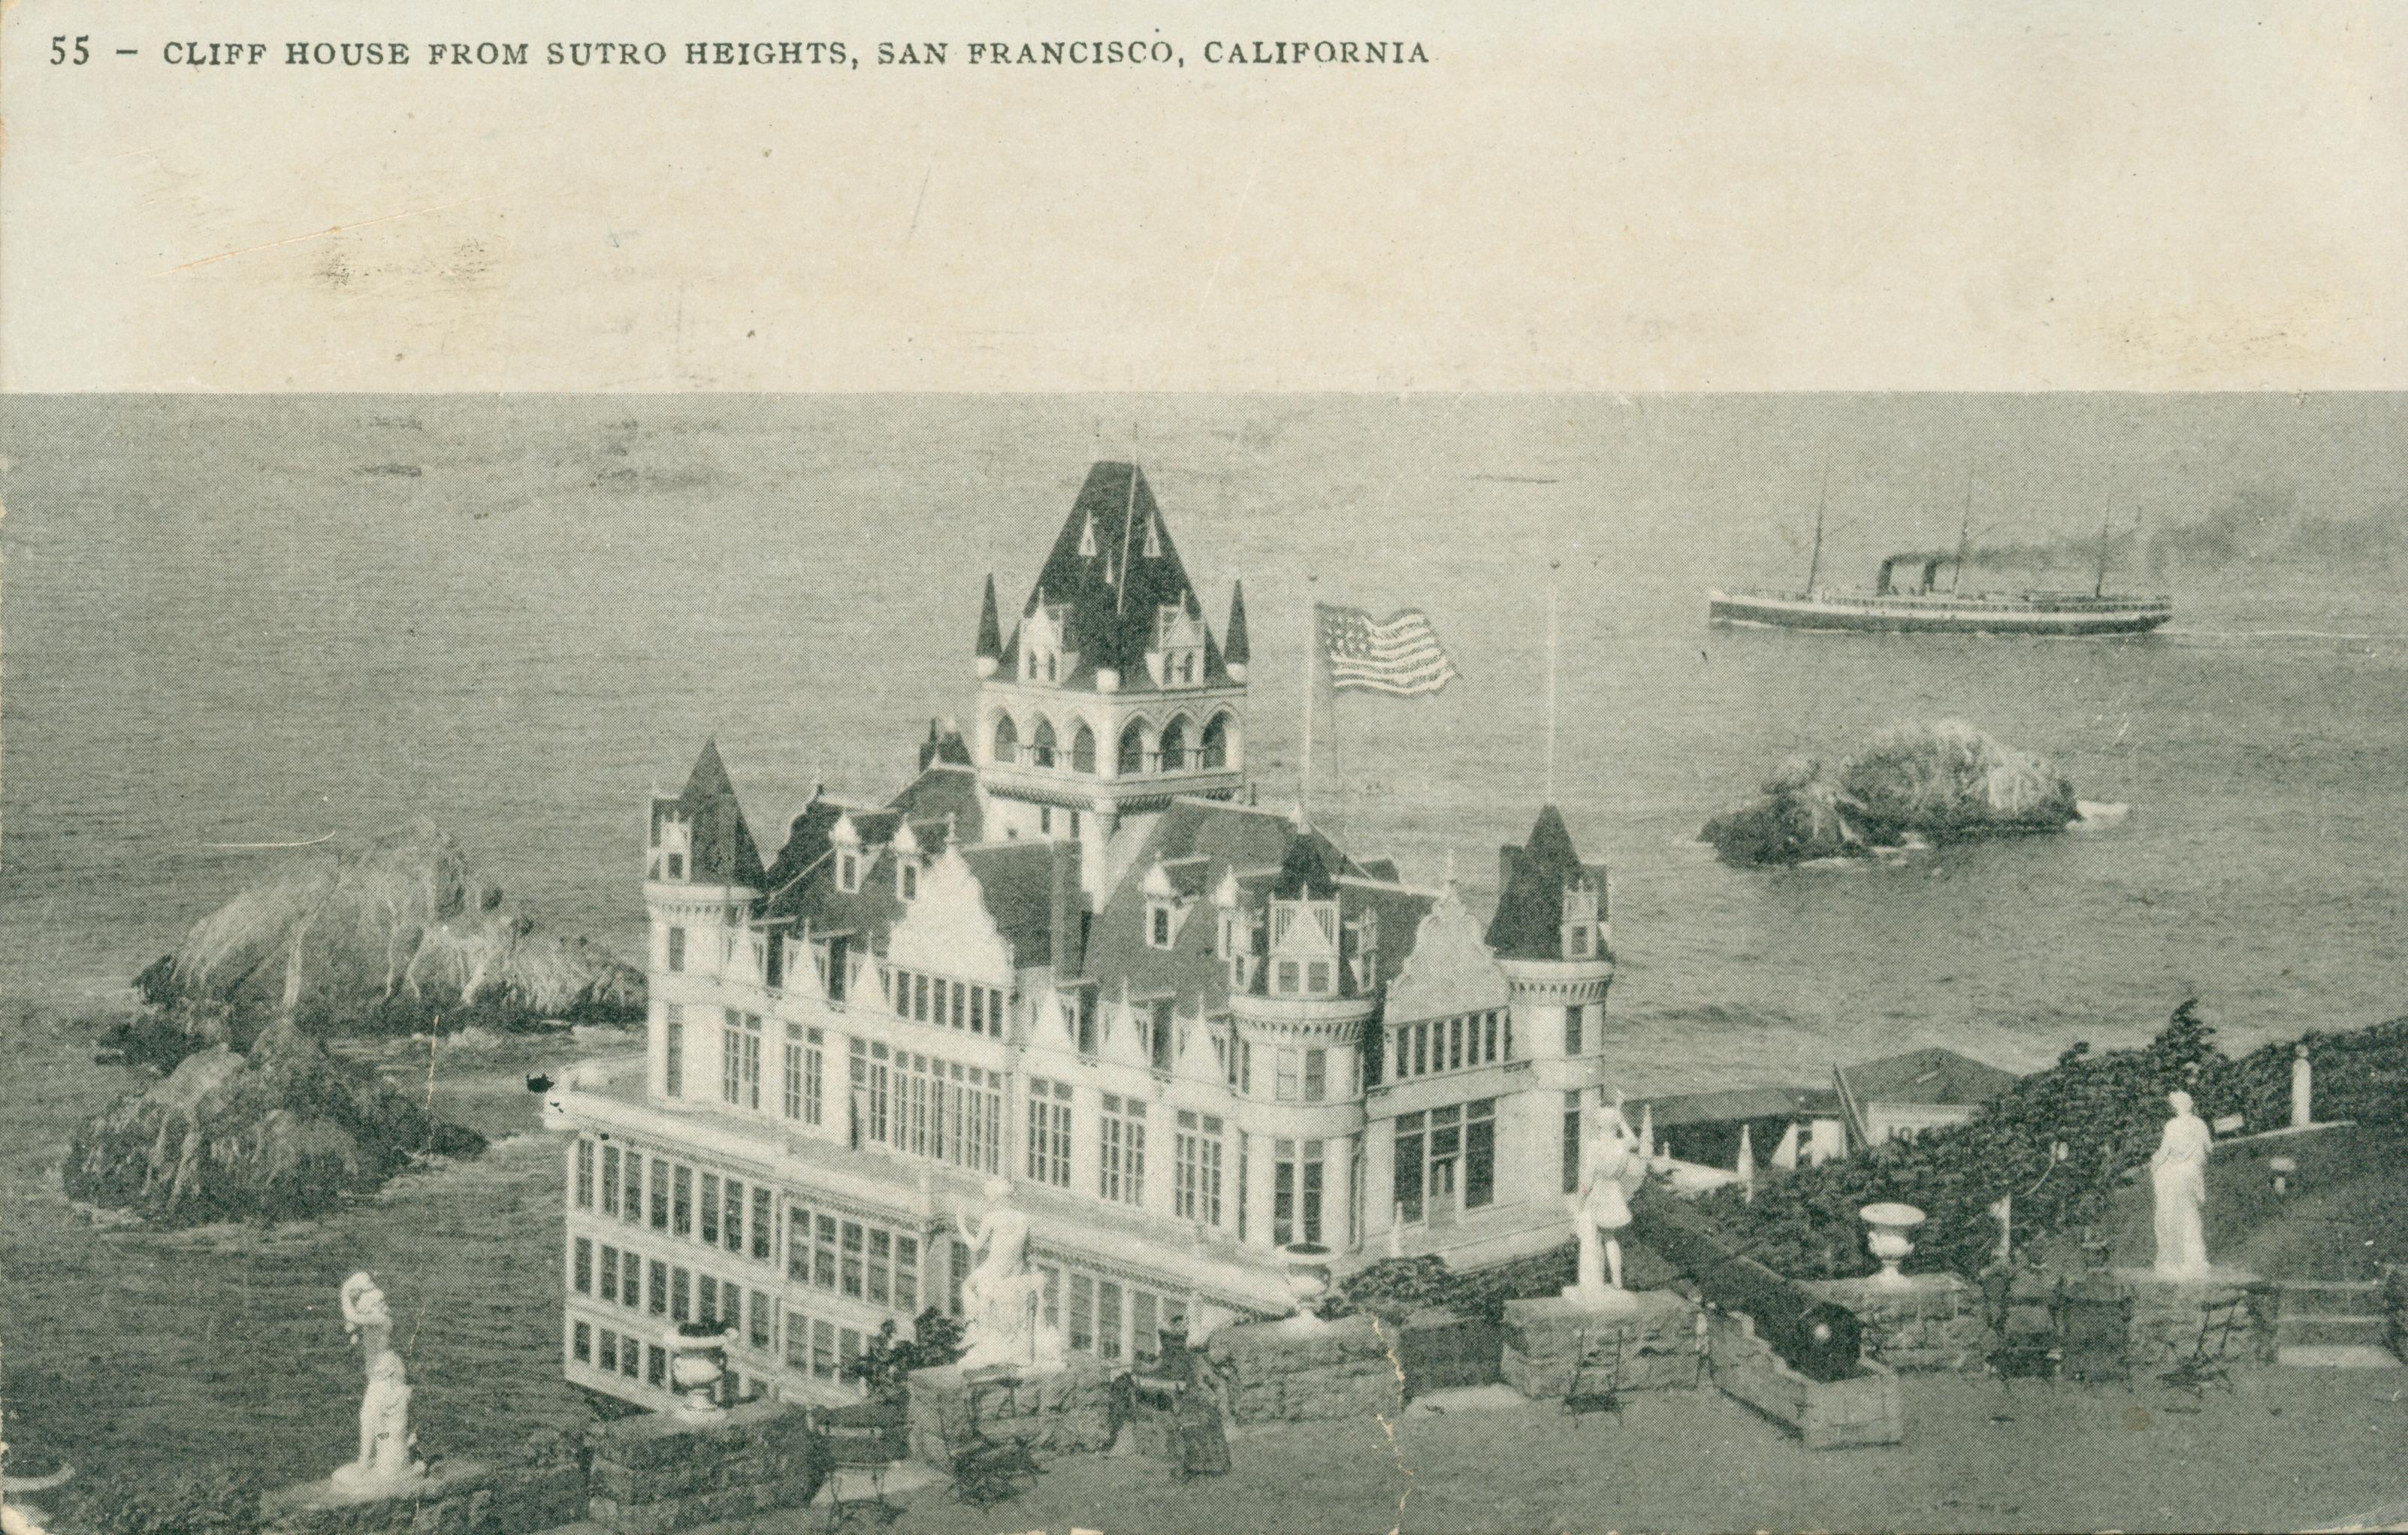 Shows the Cliff House and Seal Rocks, with the statues on Sutro Heights in the foreground.